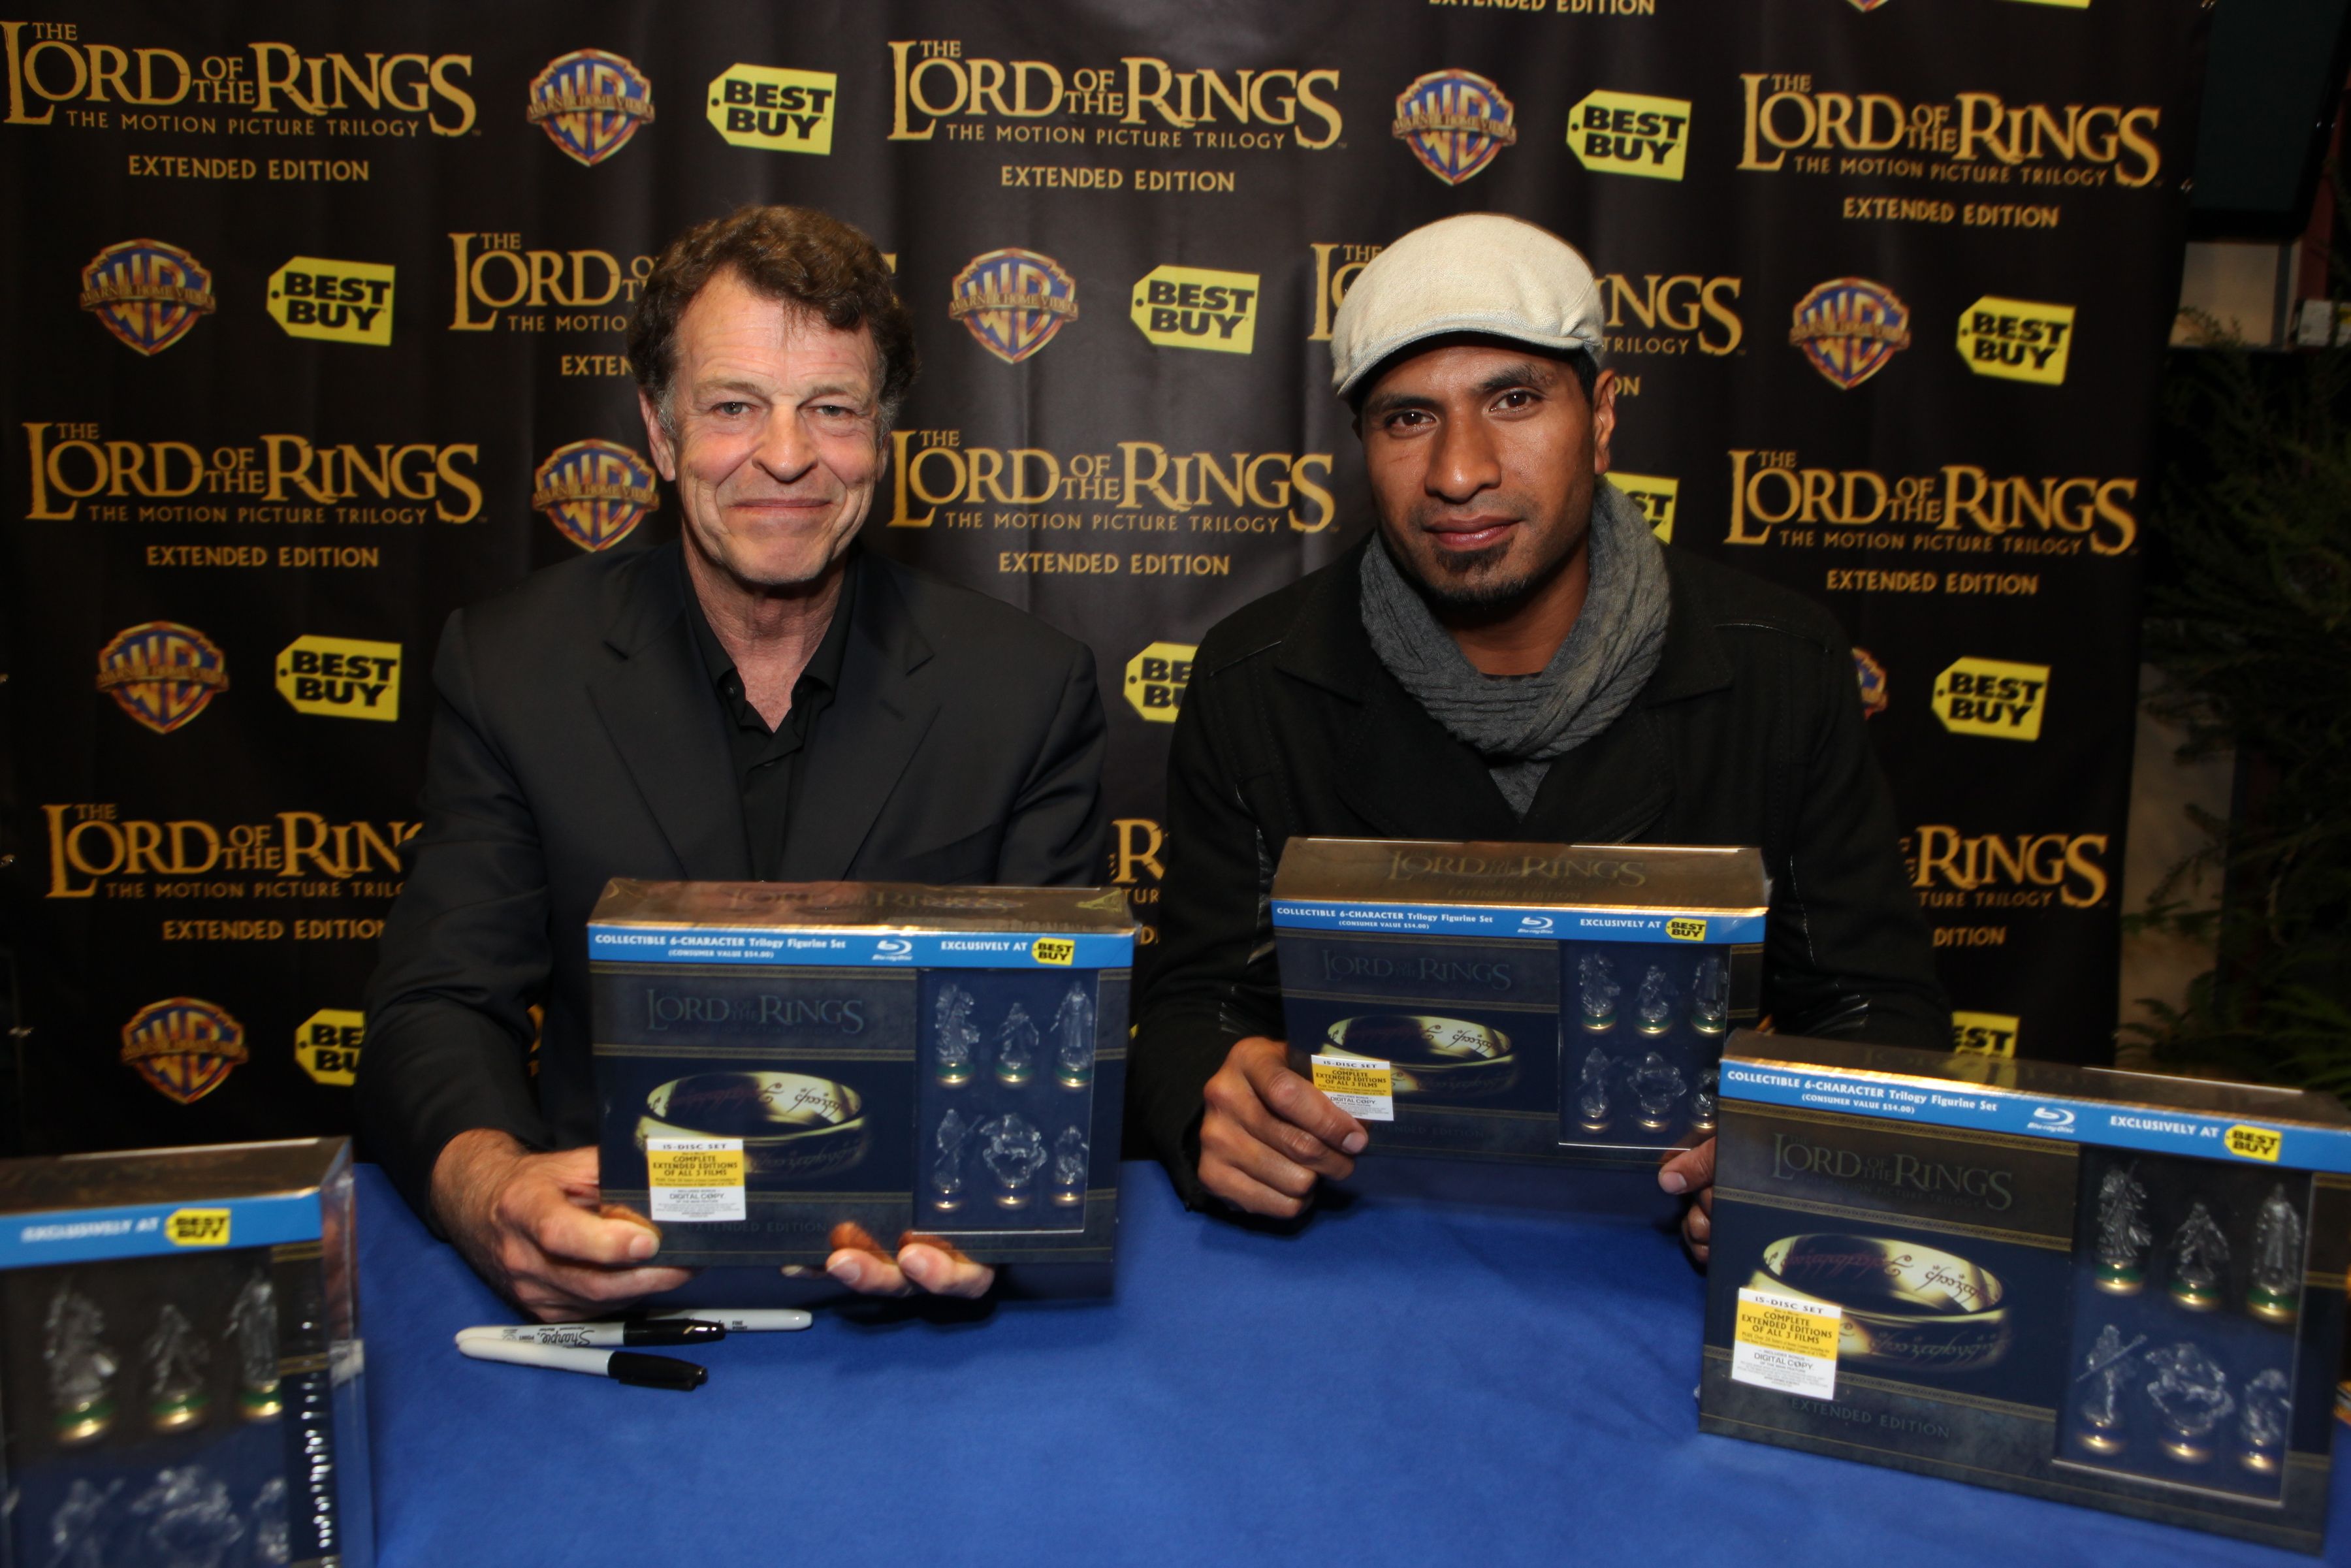 Actors John Noble and Sala Baker at The Lord of the Rings Blu-ray celebration in Los AngelesIf you were driving past the Best Buy in West Los Angeles yesterday, you might have seen a few sights you don't see every day, even in L.A. The gigantic store on Sawtelle Blvd. was transformed into Middle Earth to celebrate the midnight release of {0} Extended Edition Blu-ray release, which hits shelves June 28. I was invited to take part in the festivities, and even chat with a few cast members from the 